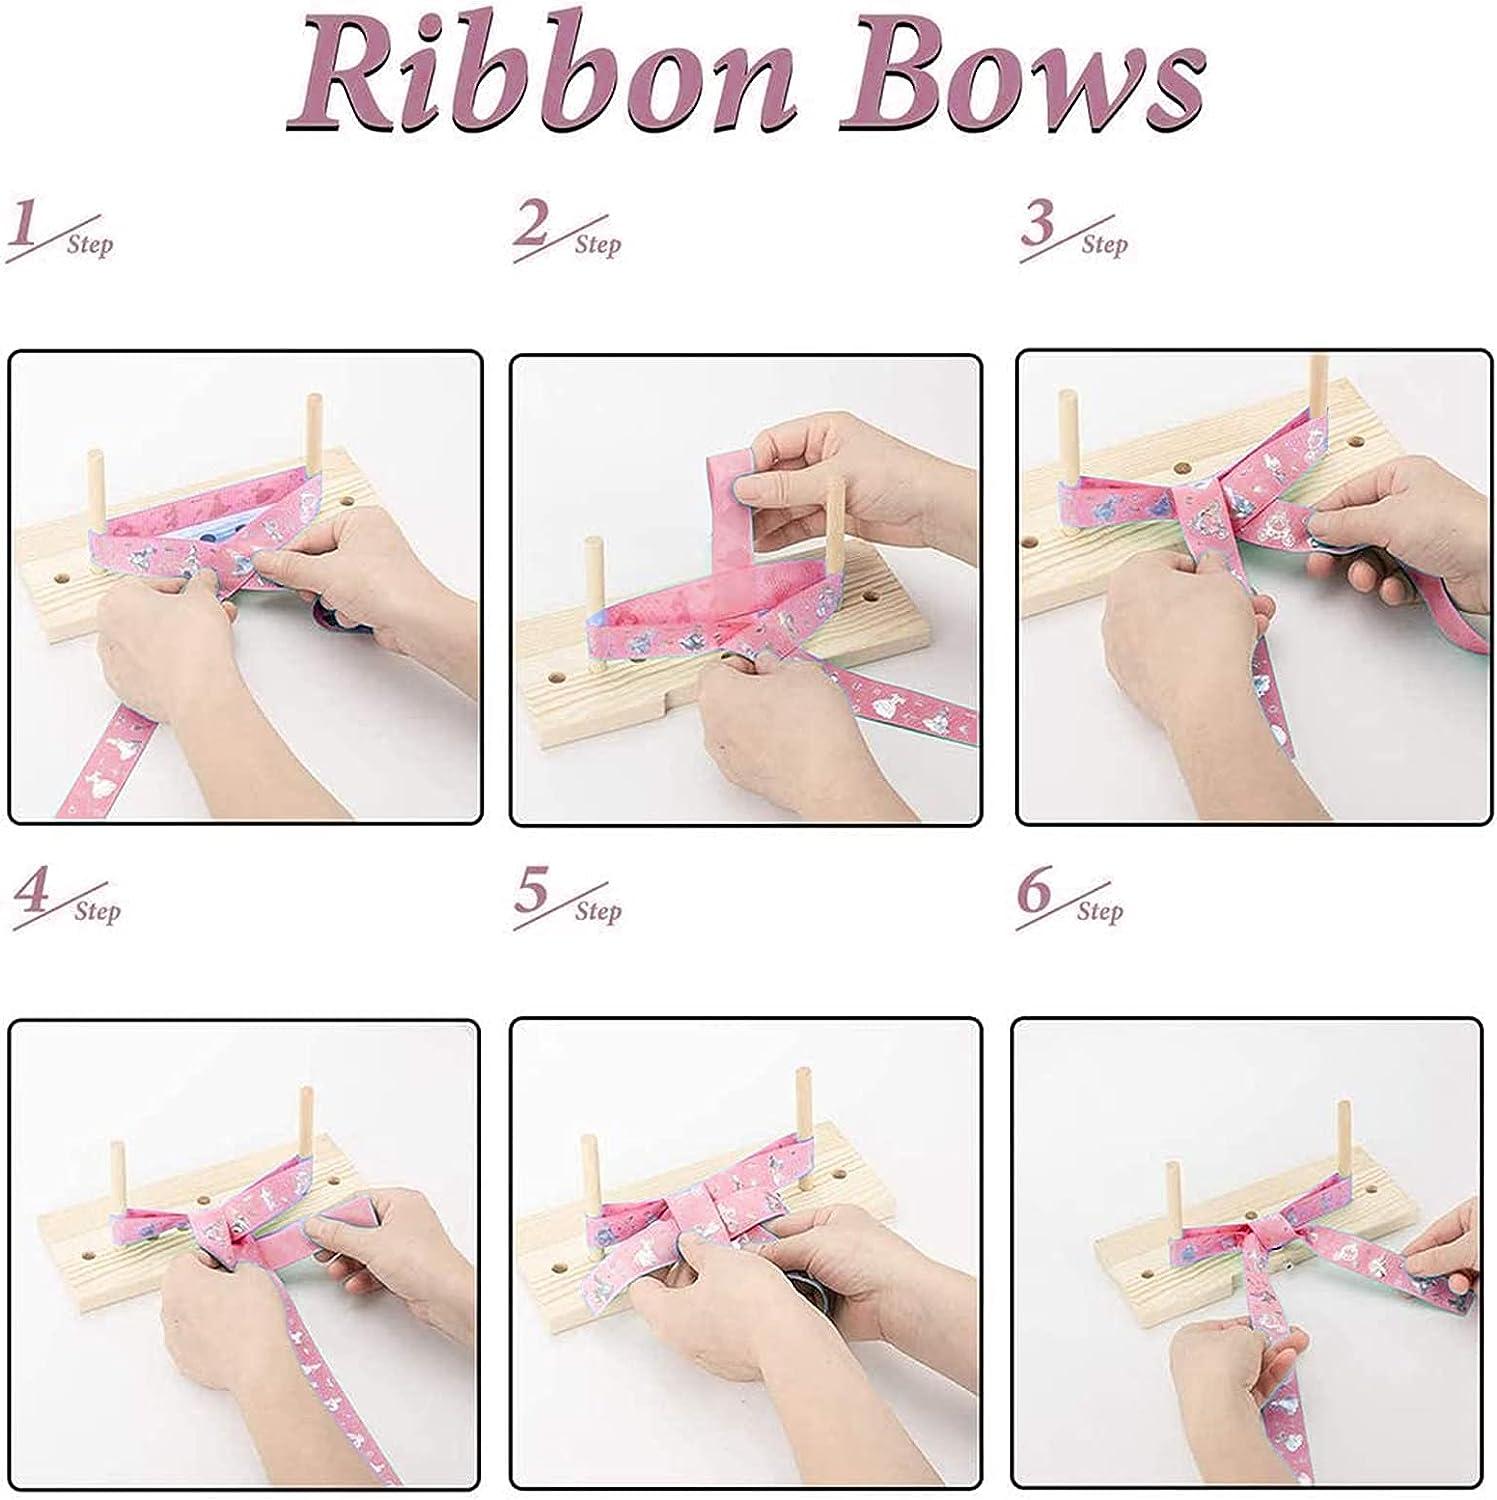 YUIO Bow Maker for Ribbon Wreaths, Double Sided Wreath Wooden Bow Making  Tools for Creating Gift Bows, Handmade Bowknot Making for Home Decoration